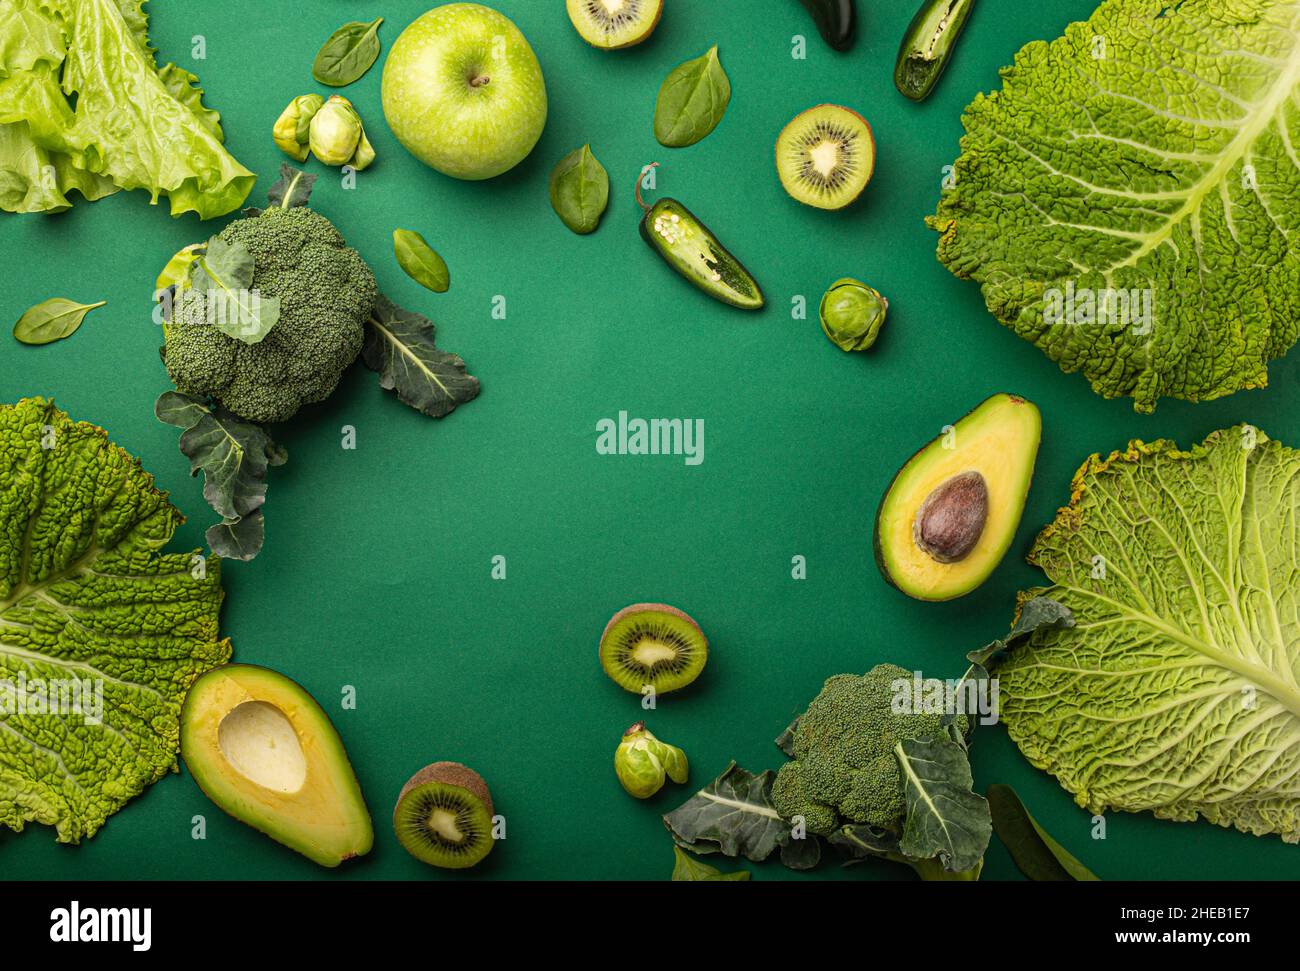 Creative layout food concept made of green fruit and vegetables on green background Stock Photo